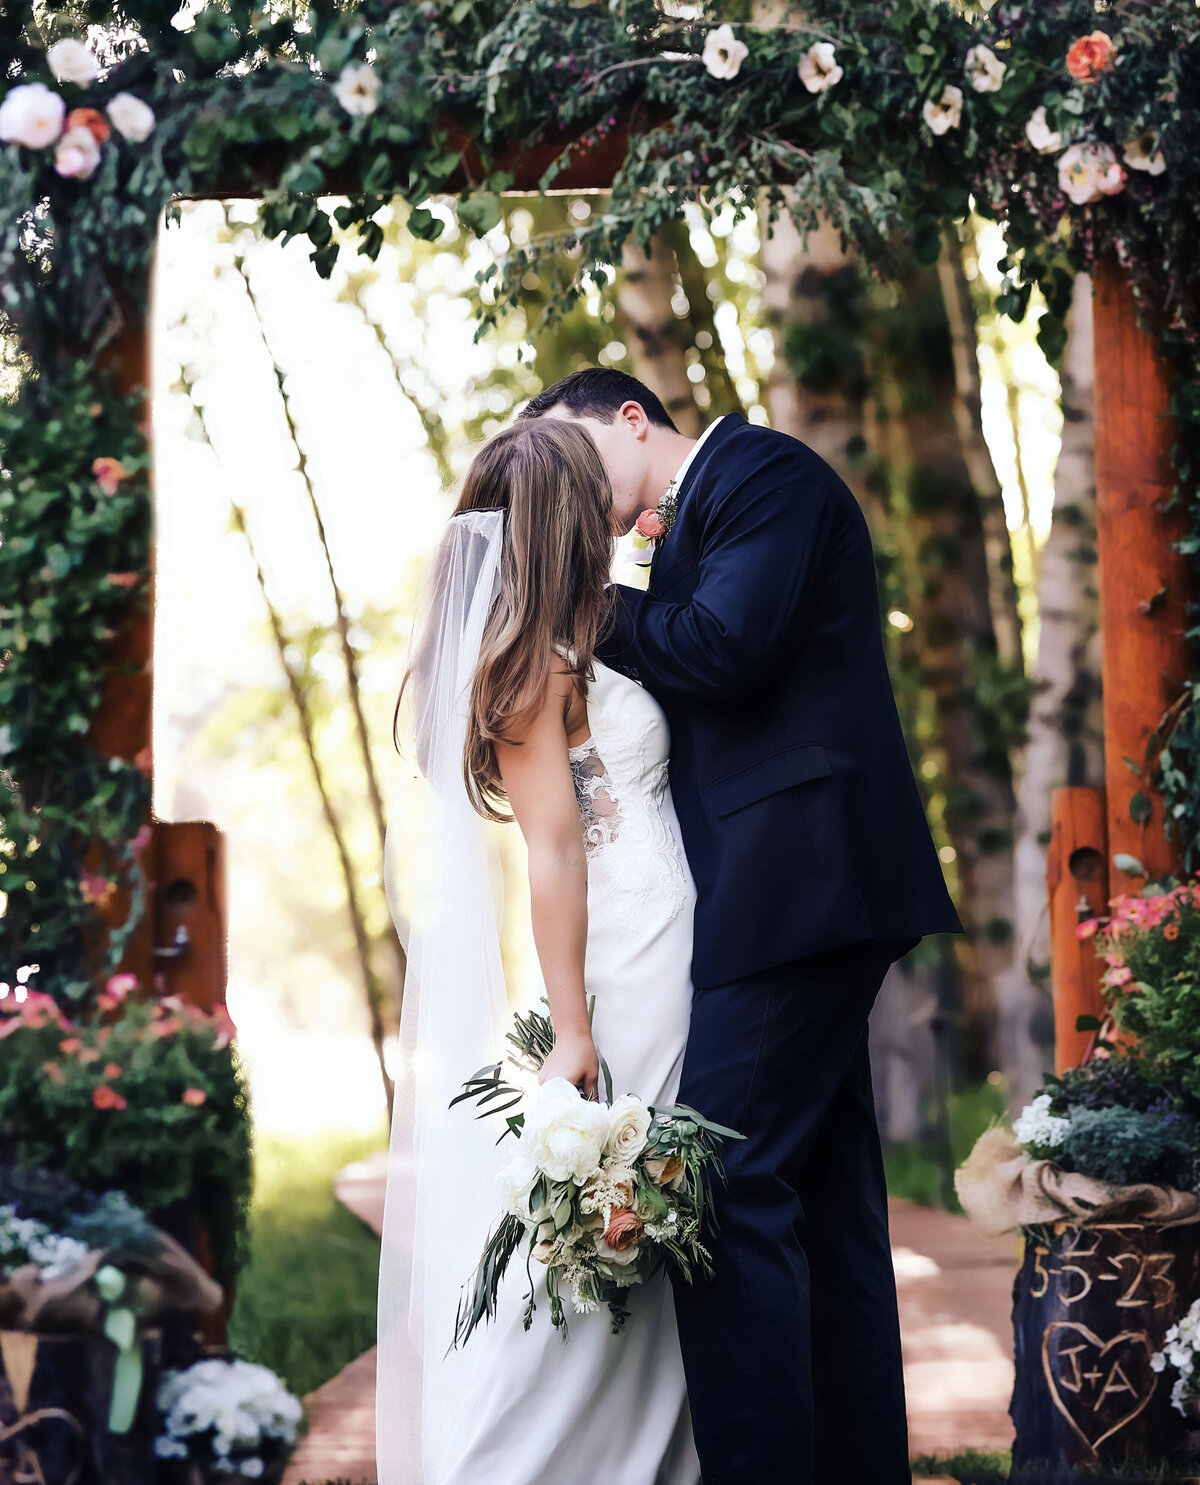 The moment the bride and groom kiss, underneath a beautiful and colorful flowered alter in their aspen wedding.